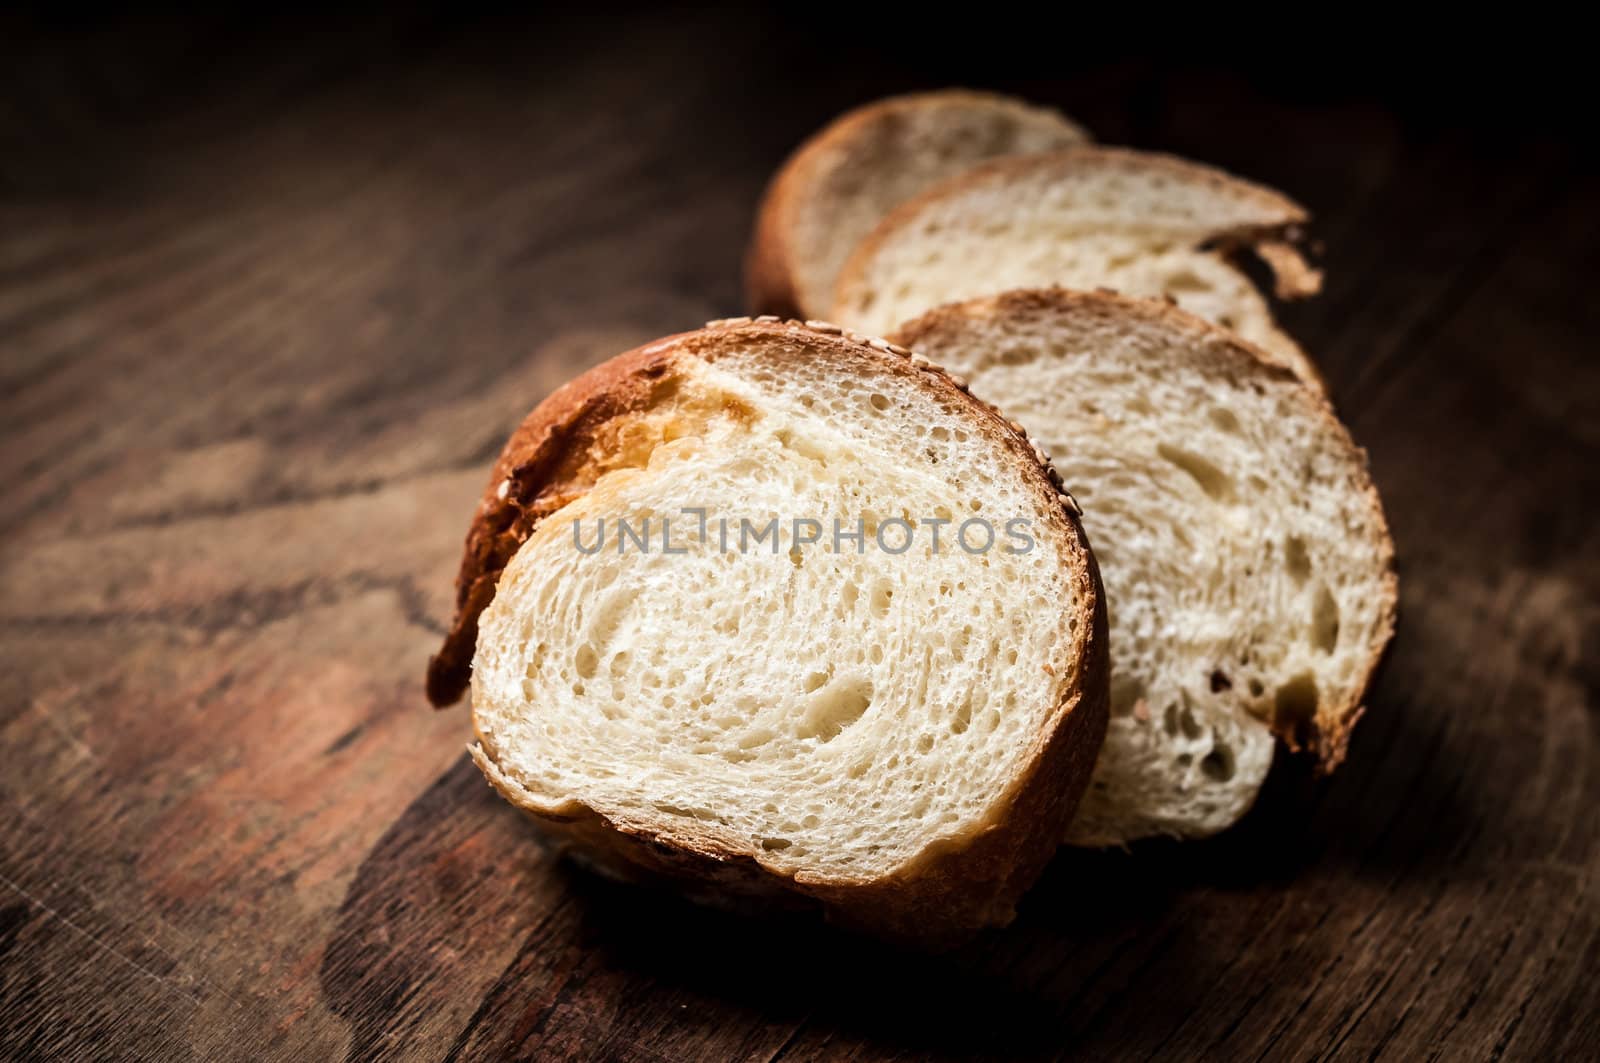 sliced wholemeal sesame bread on wood by peus